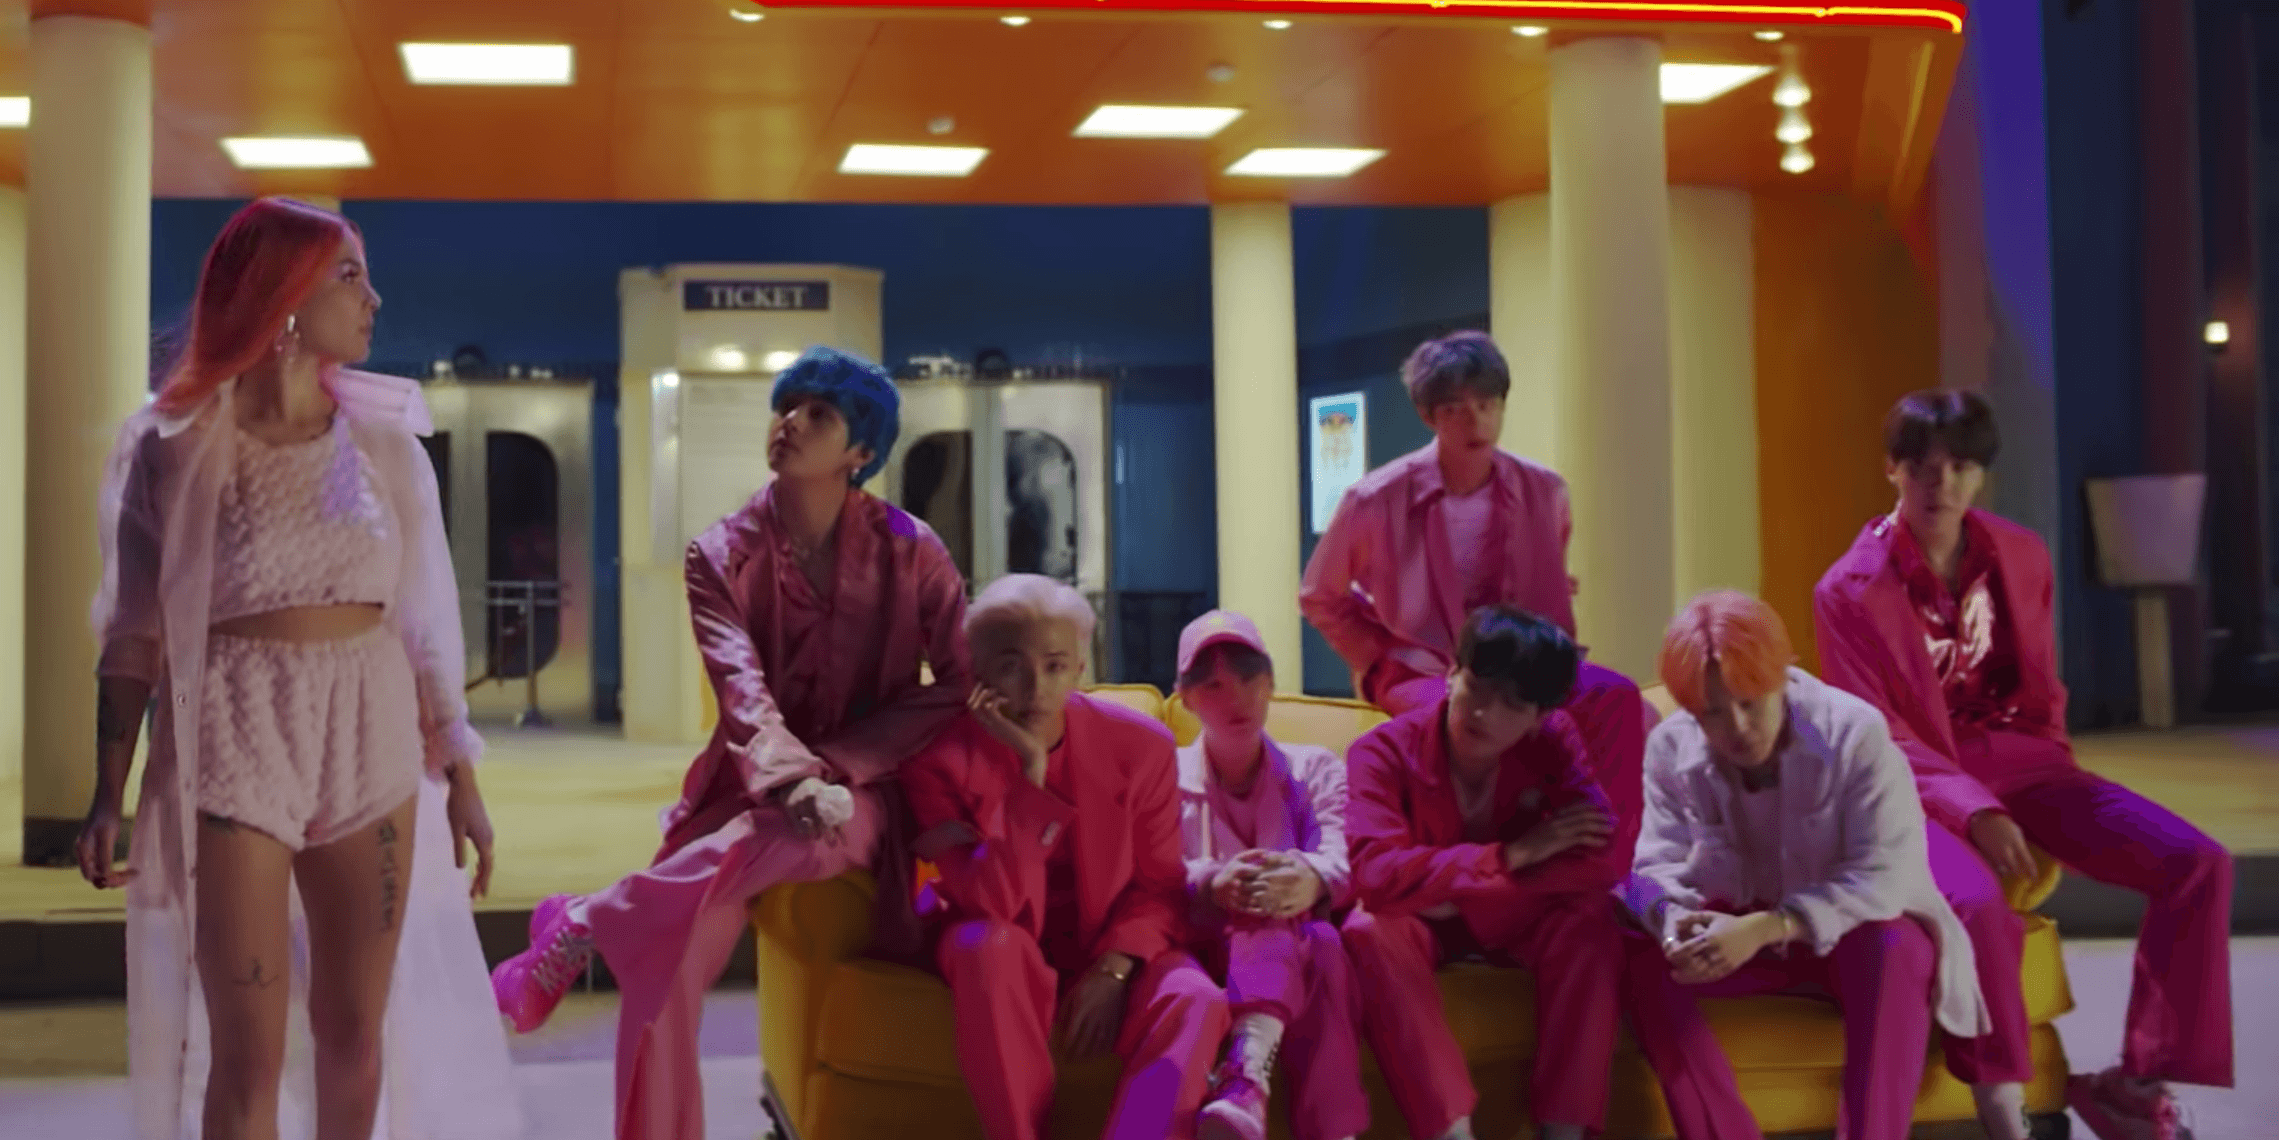 BTS previews new collaboration with Halsey, 'Boy With Luv'